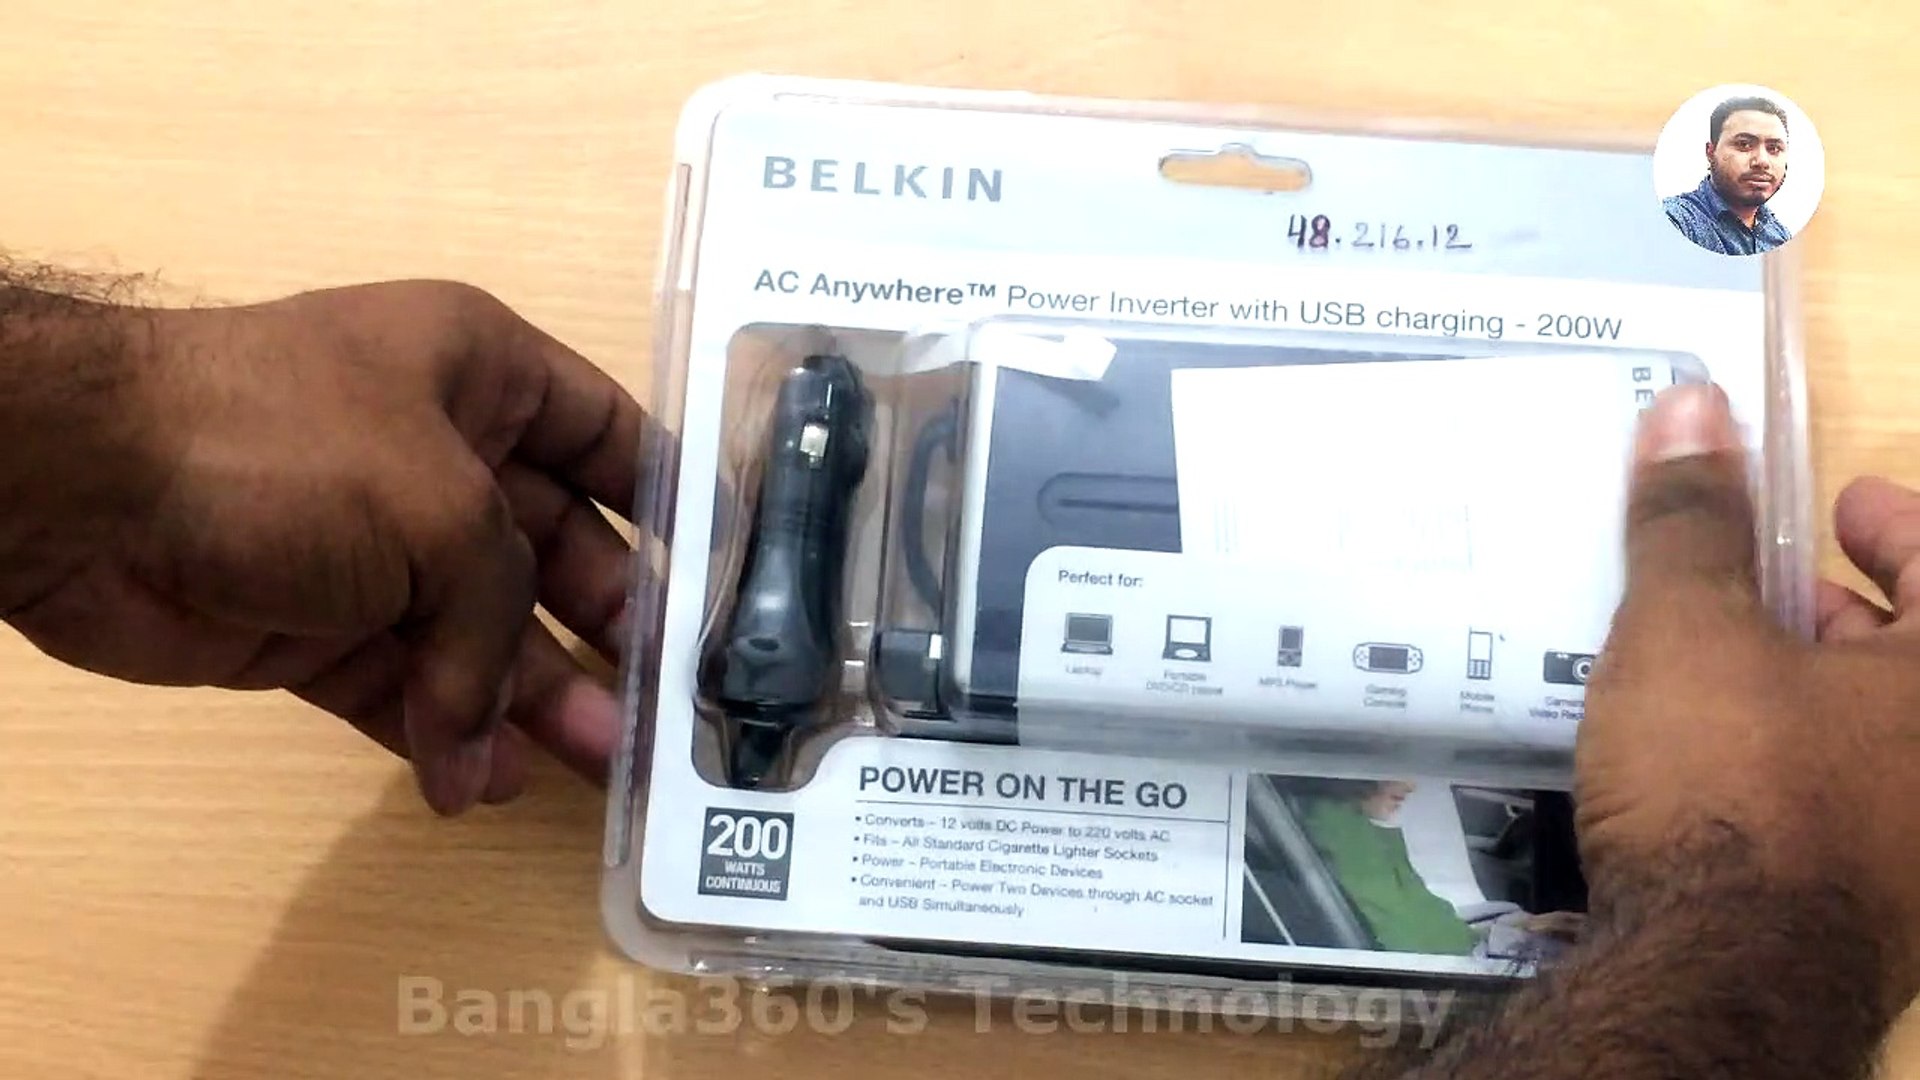 Belkin Ac Anywhere Power Inverter With Usb Charging 200W (Unboxing) - video  Dailymotion